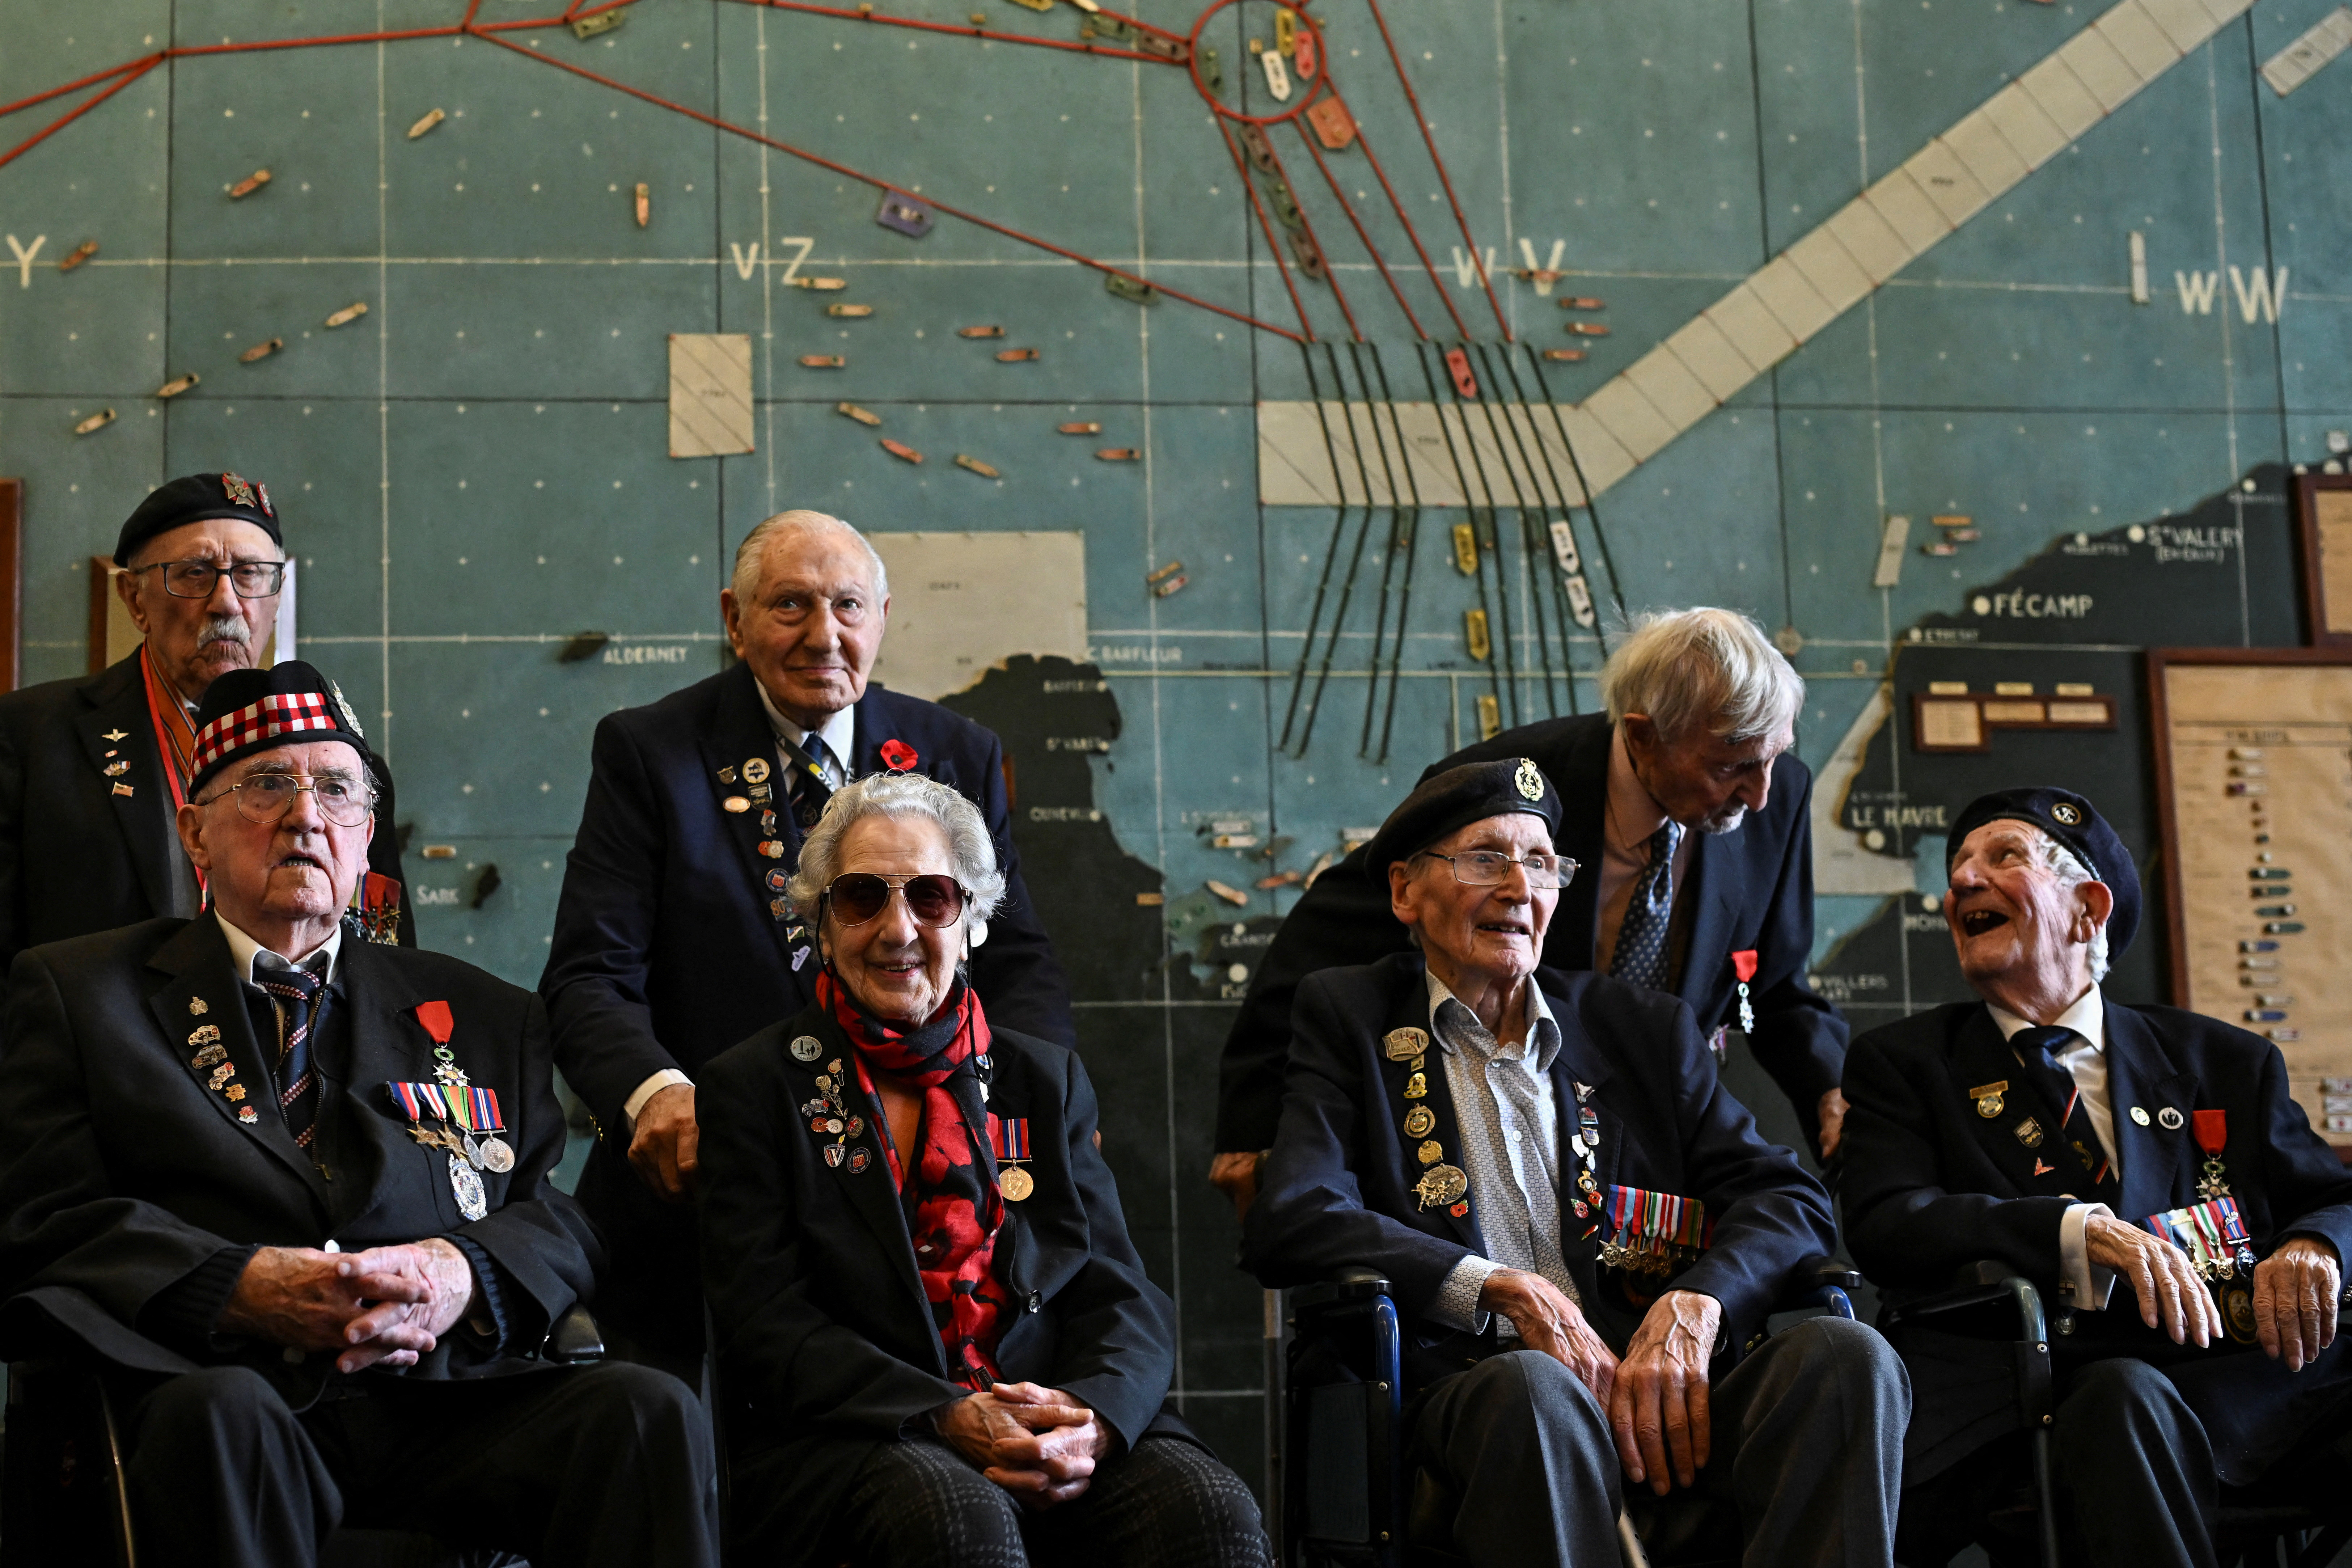 Event commemorating the 80th anniversary of D-Day, in Portsmouth